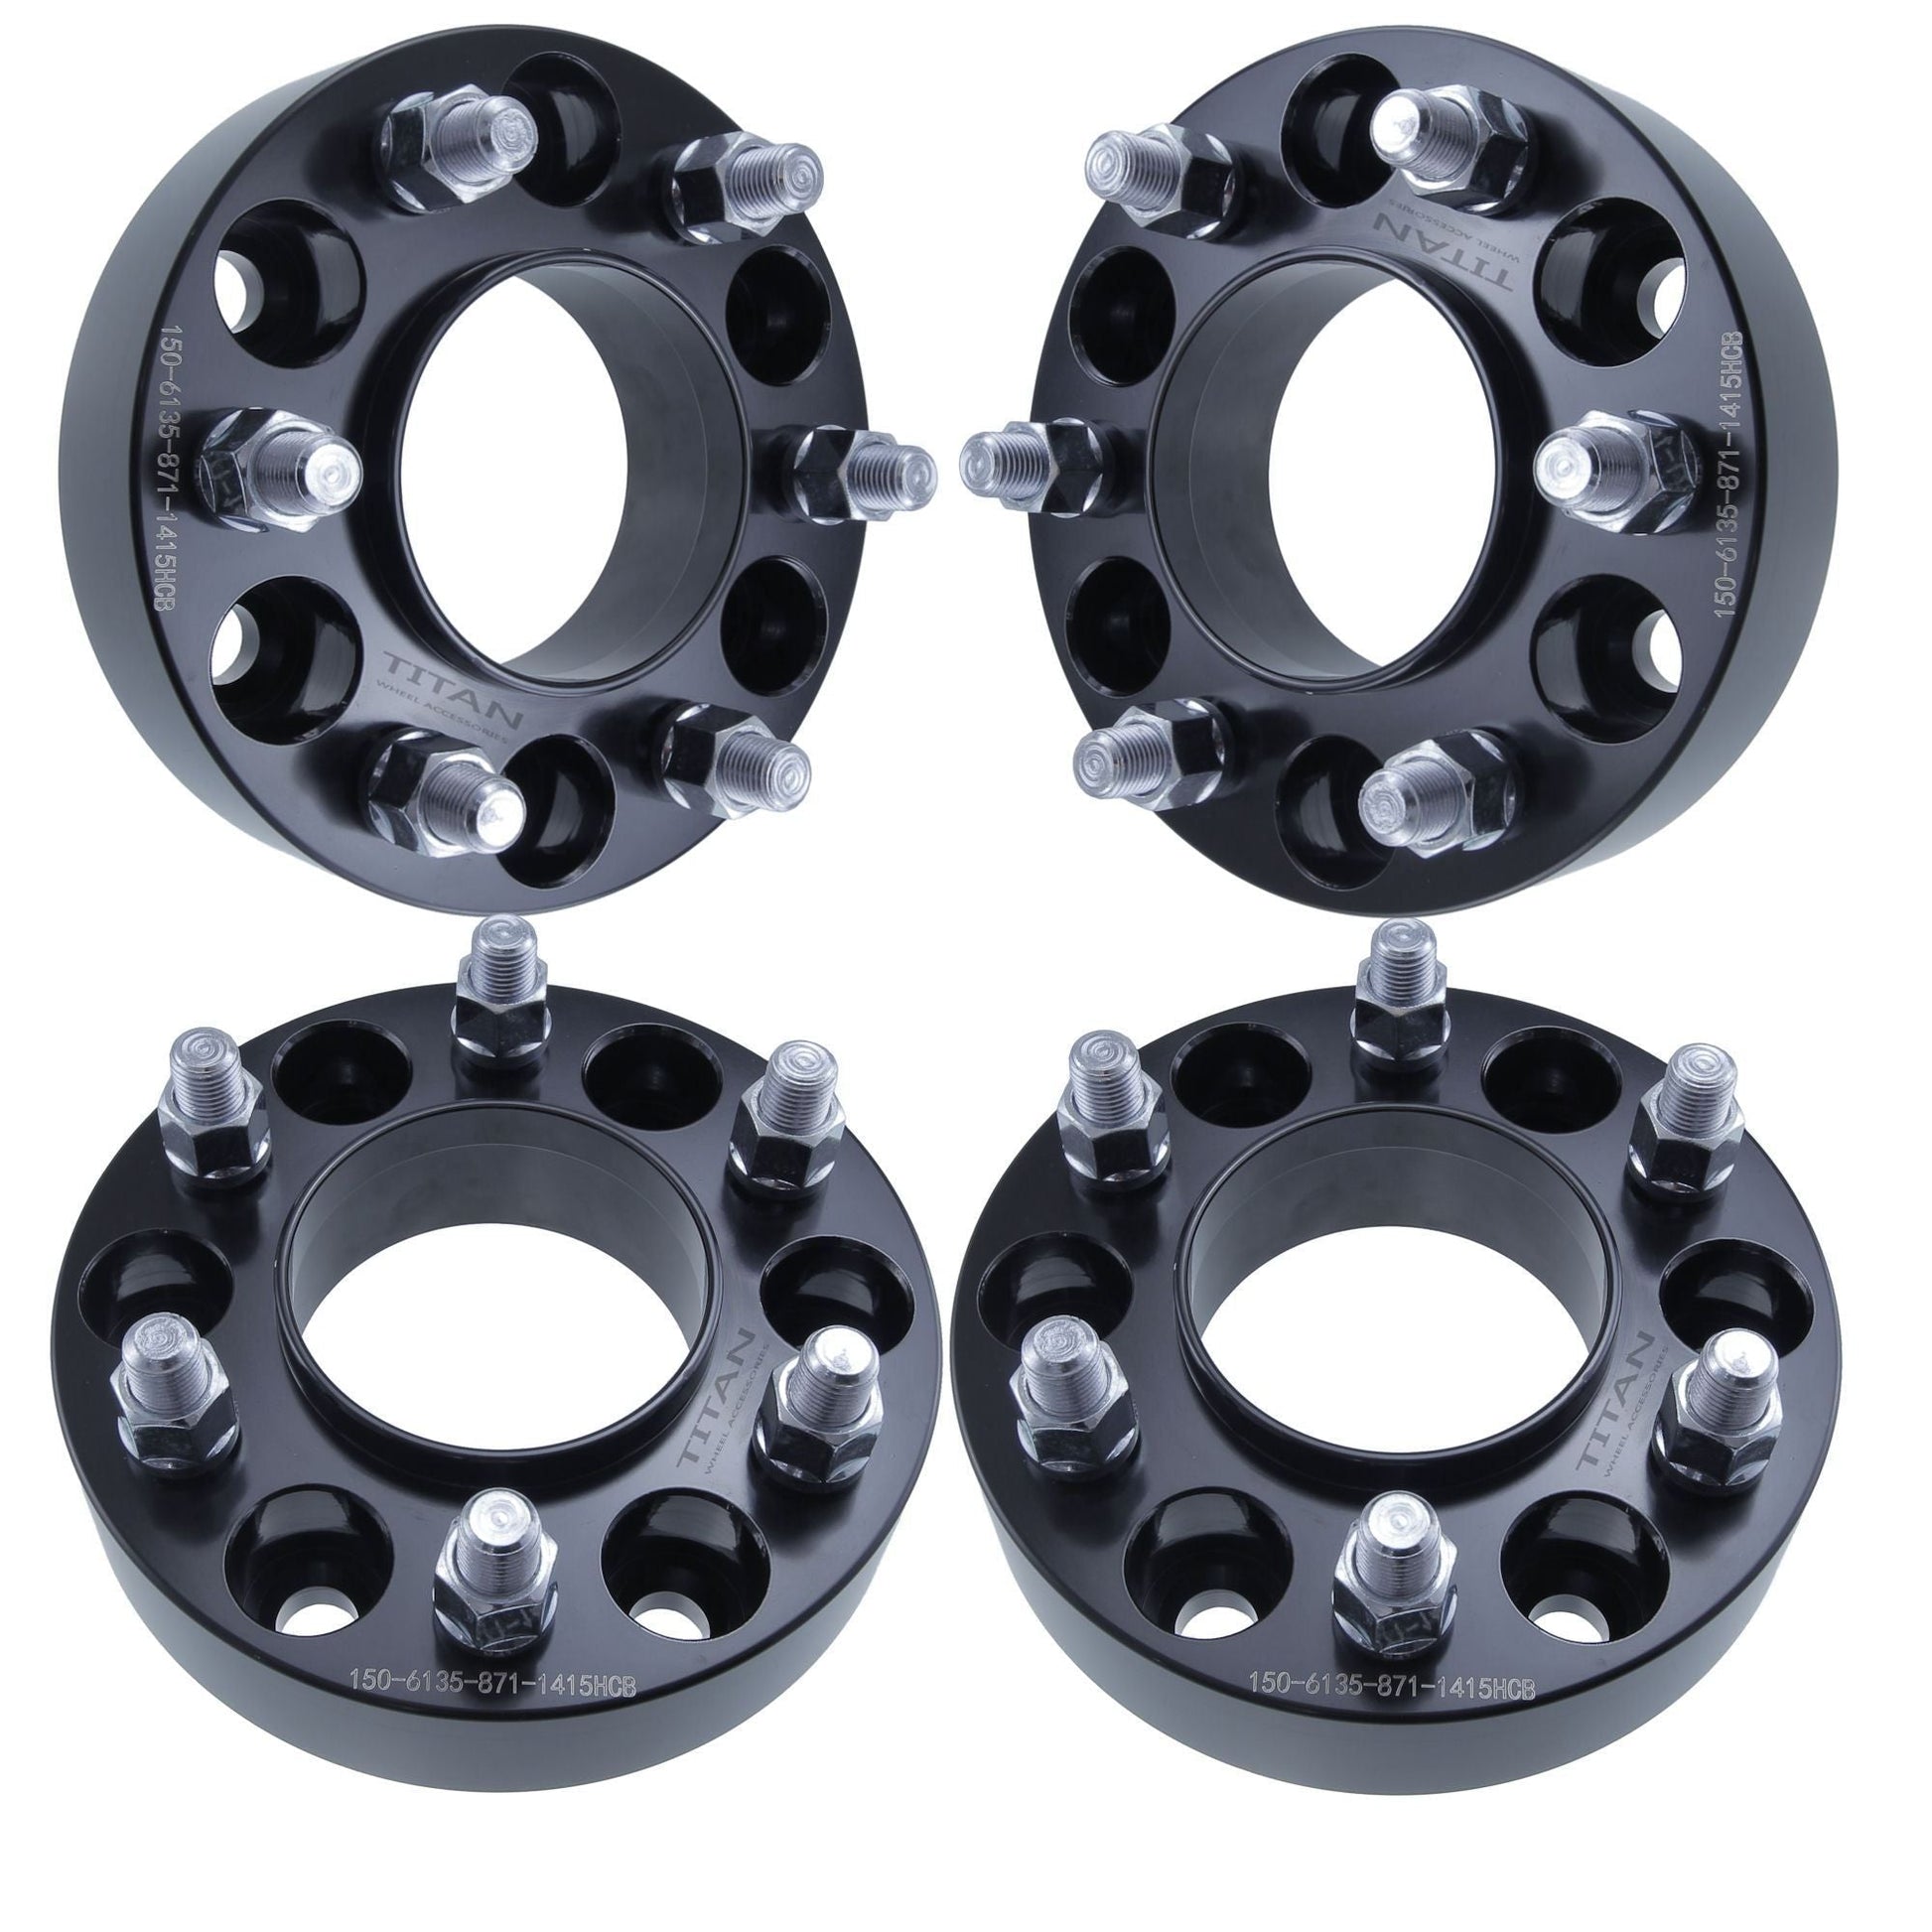 2" (50mm) Titan Wheel Spacers for Ford F150 2015+ | 6x135 | 87.1 Hubcentric |14x1.5 Studs |  Set of 4 | Titan Wheel Accessories